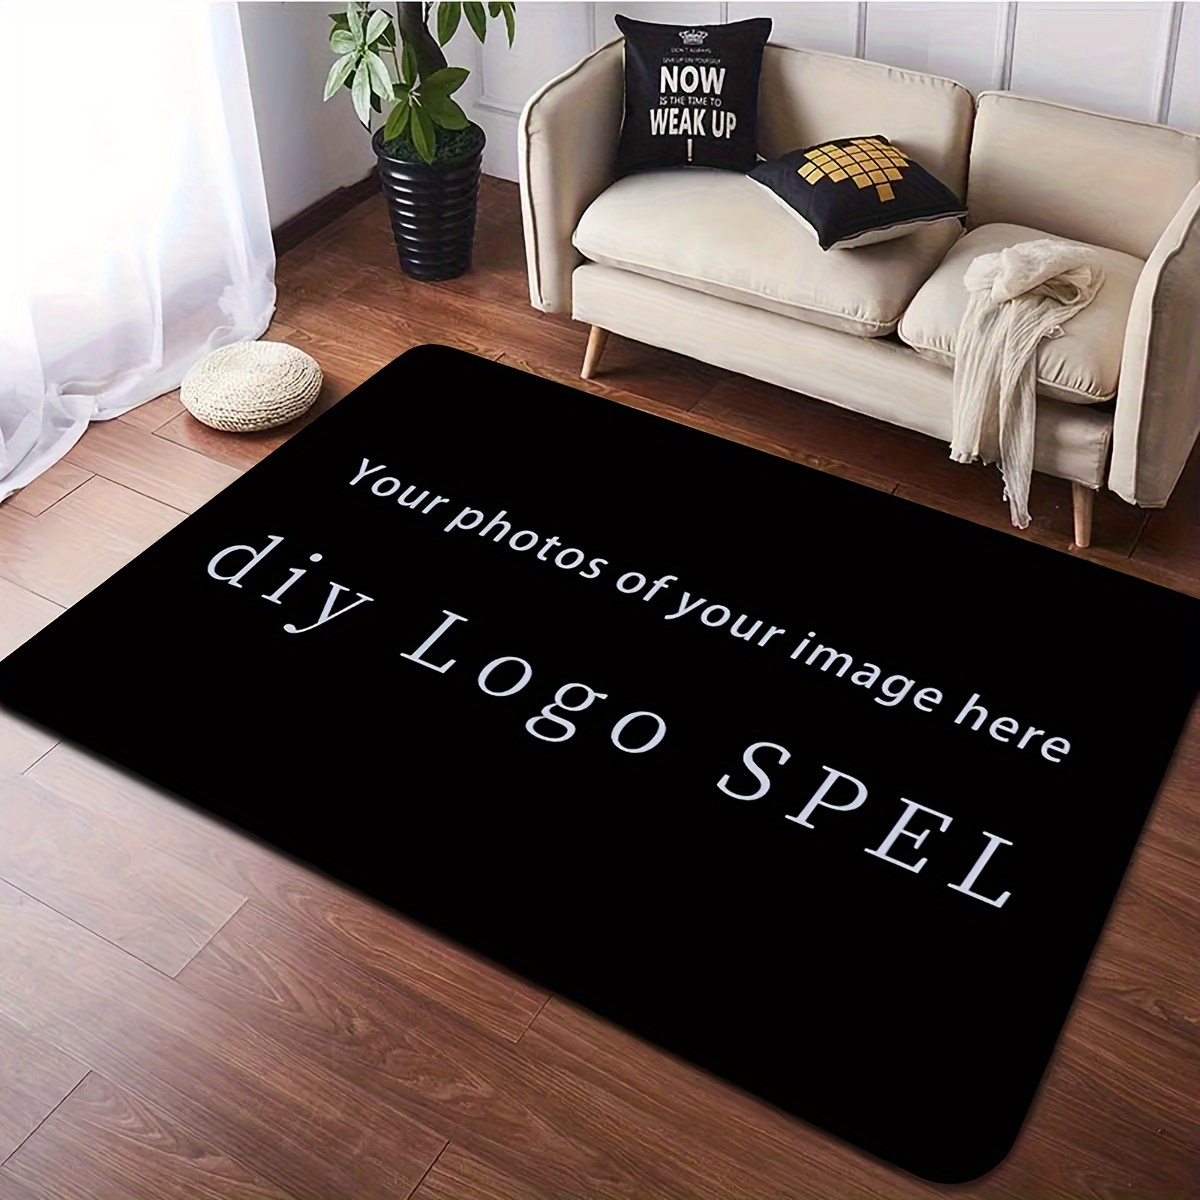 

Customizable Bath Rug - Non-slip, Machine Washable, Knit Weave Polyester Floor Mat For Home, Bedroom, Living Room - Personalize With Your Design, Durable & Soft Velvet Feel, 580gsm Thickness (1cm)